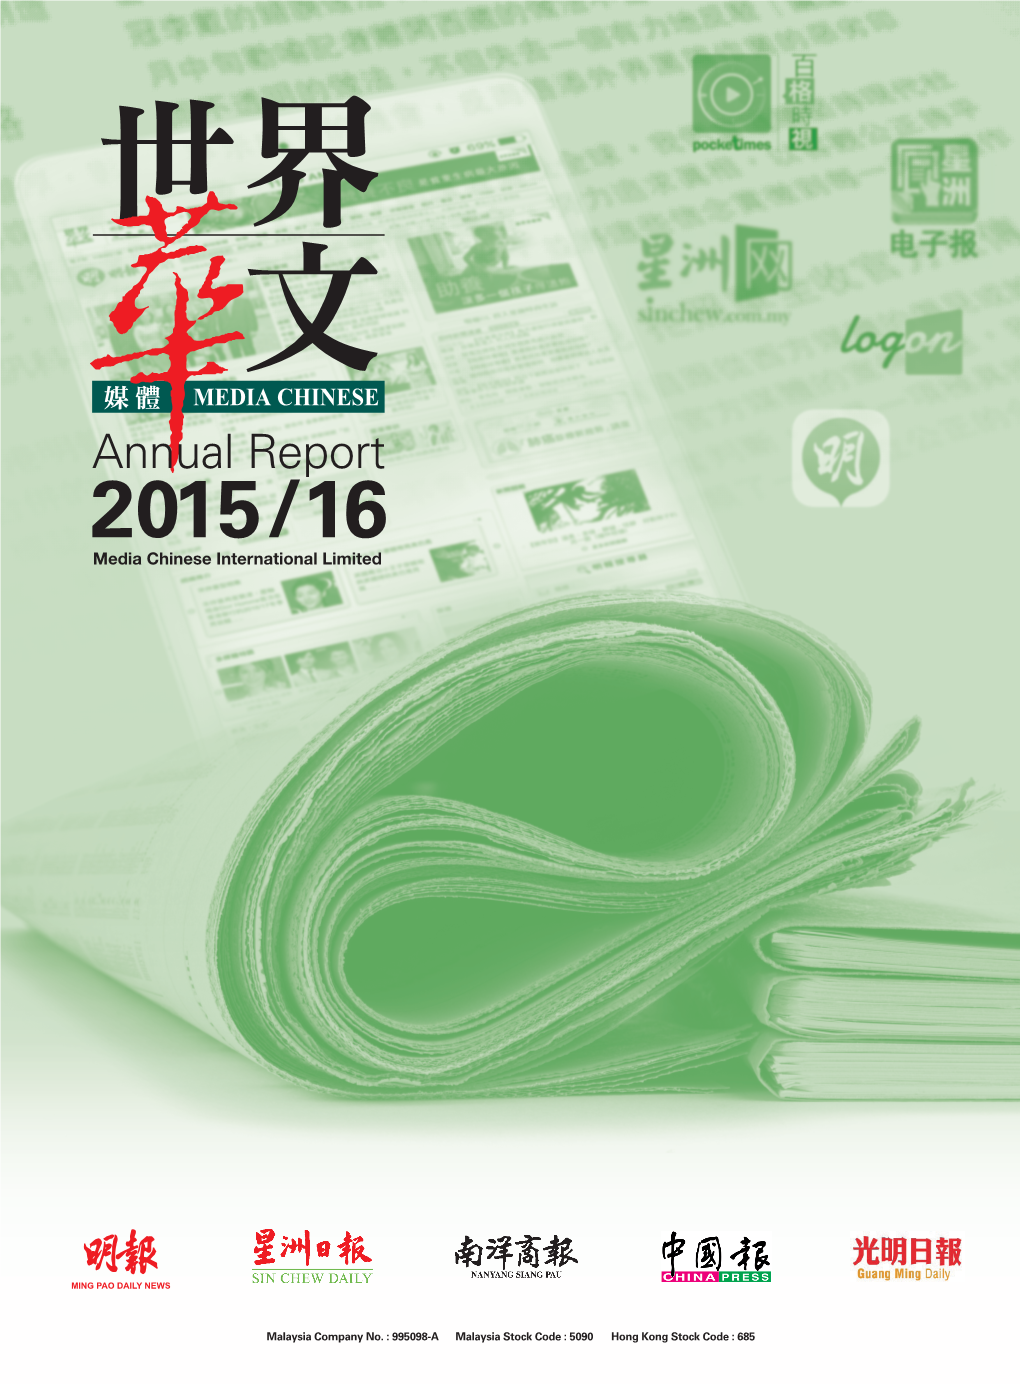 Annual Report 2015/16 Media Chinese International Limited